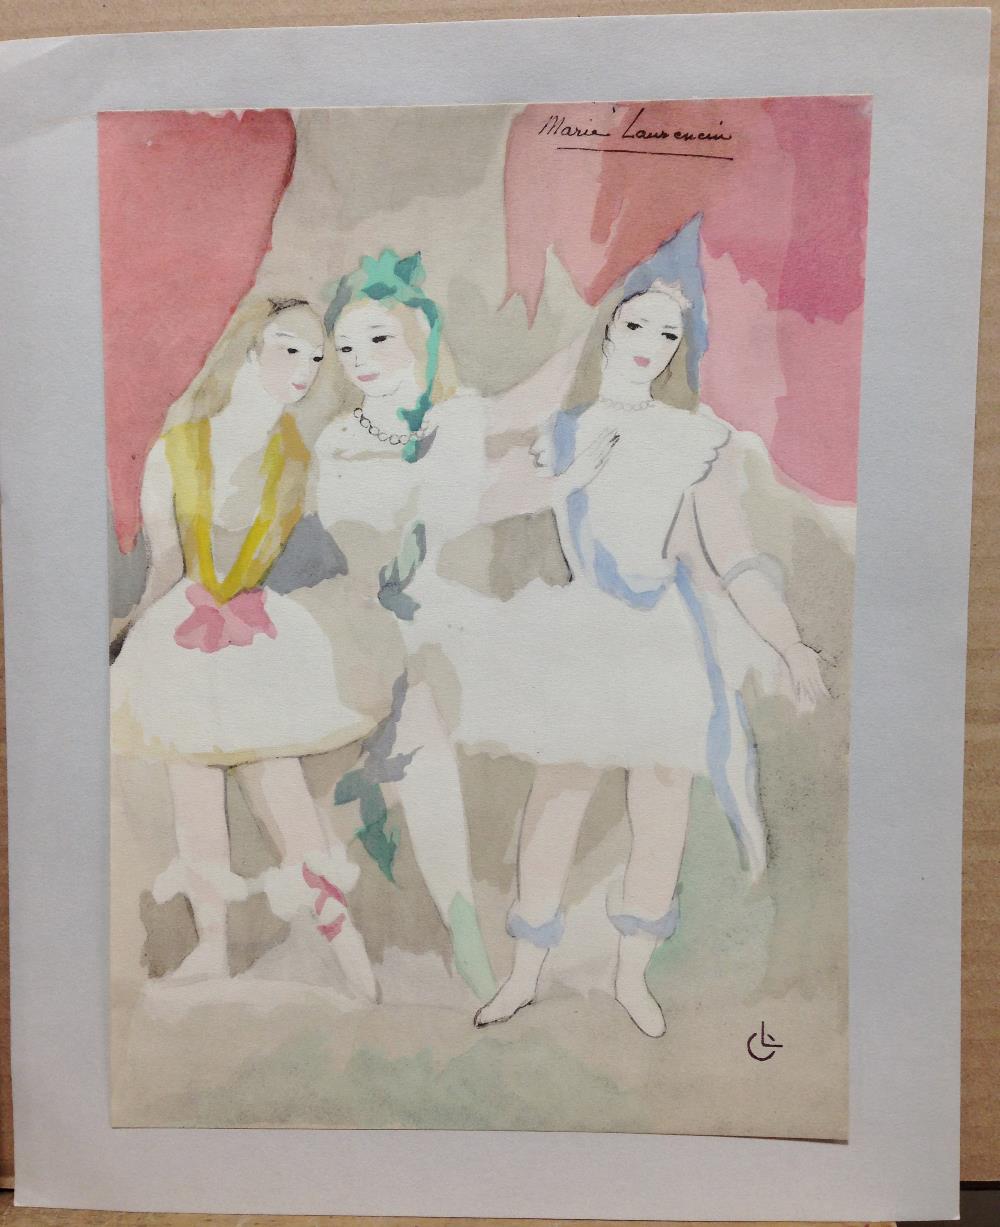 § Marie Laurencin (French, 1885-1956) Costume designs to accompany Venus and Adonis, by John Blow, - Image 10 of 11